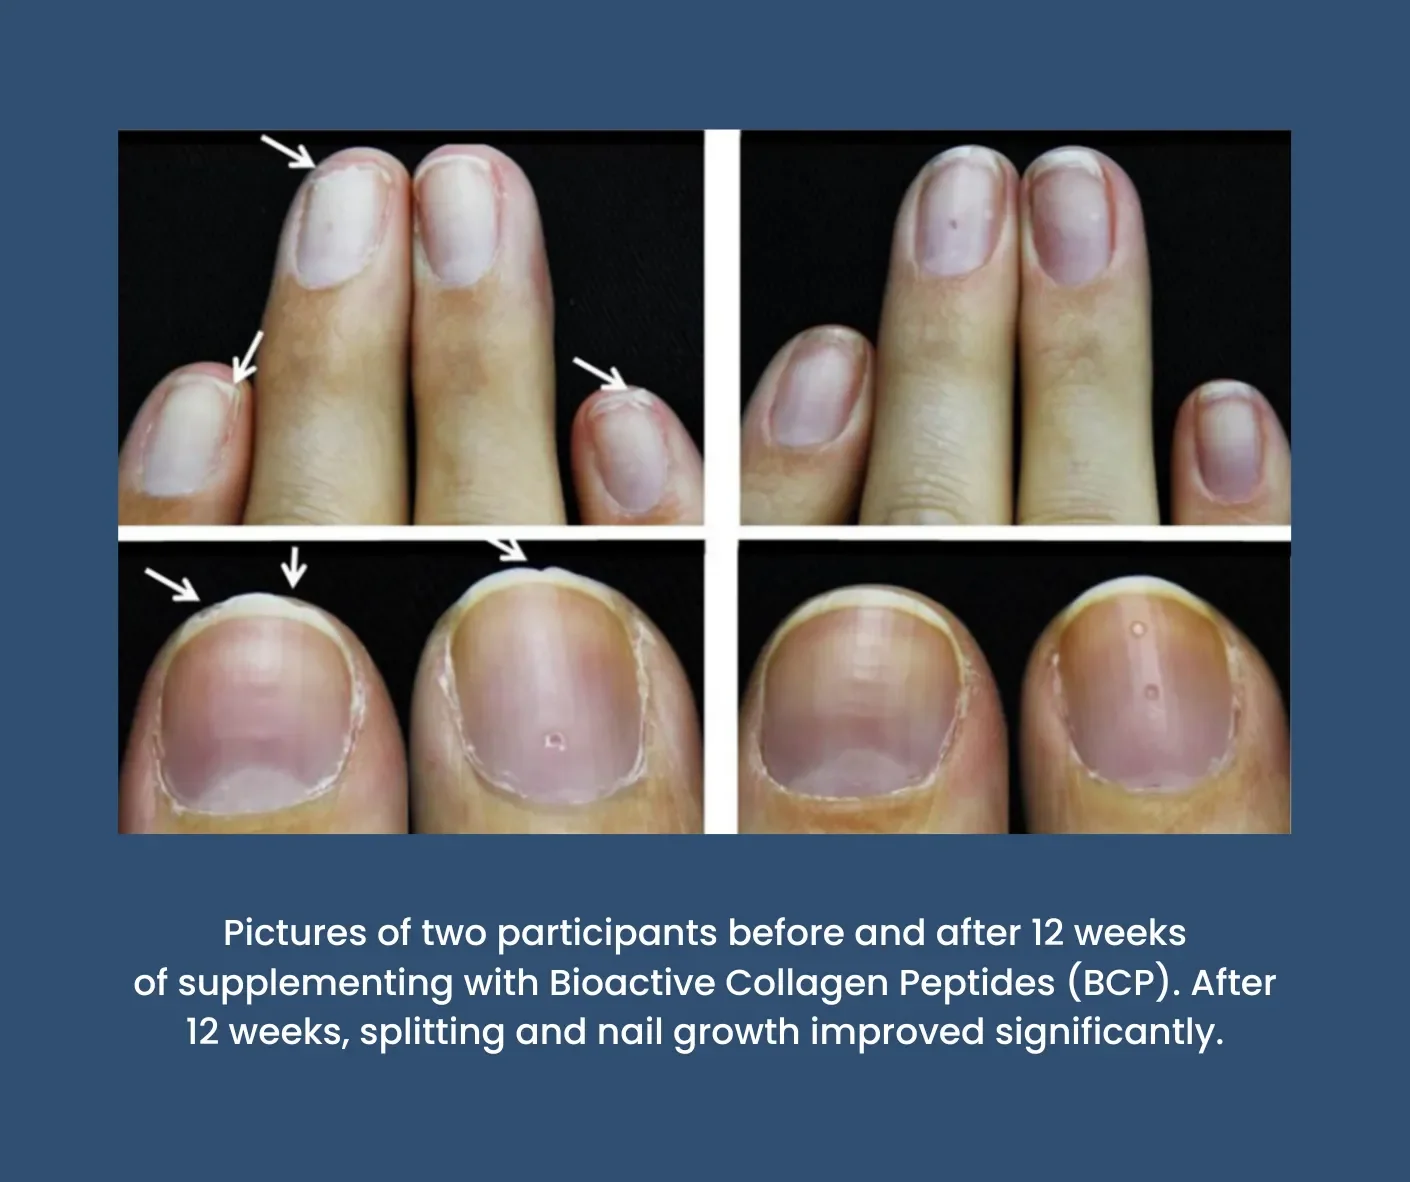 Before and after pictures of finger nails from participants taking Bioactive Collagen Peptides.